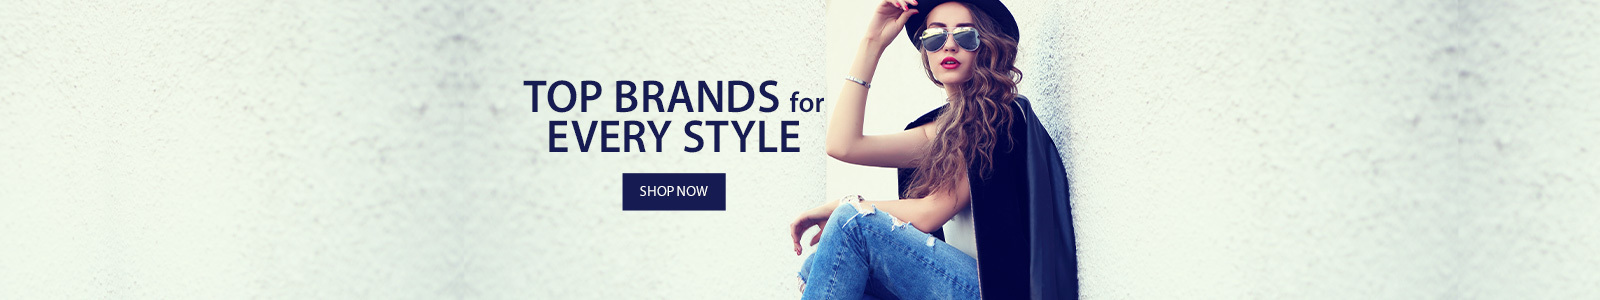 Top brands for every style. Shop Now!